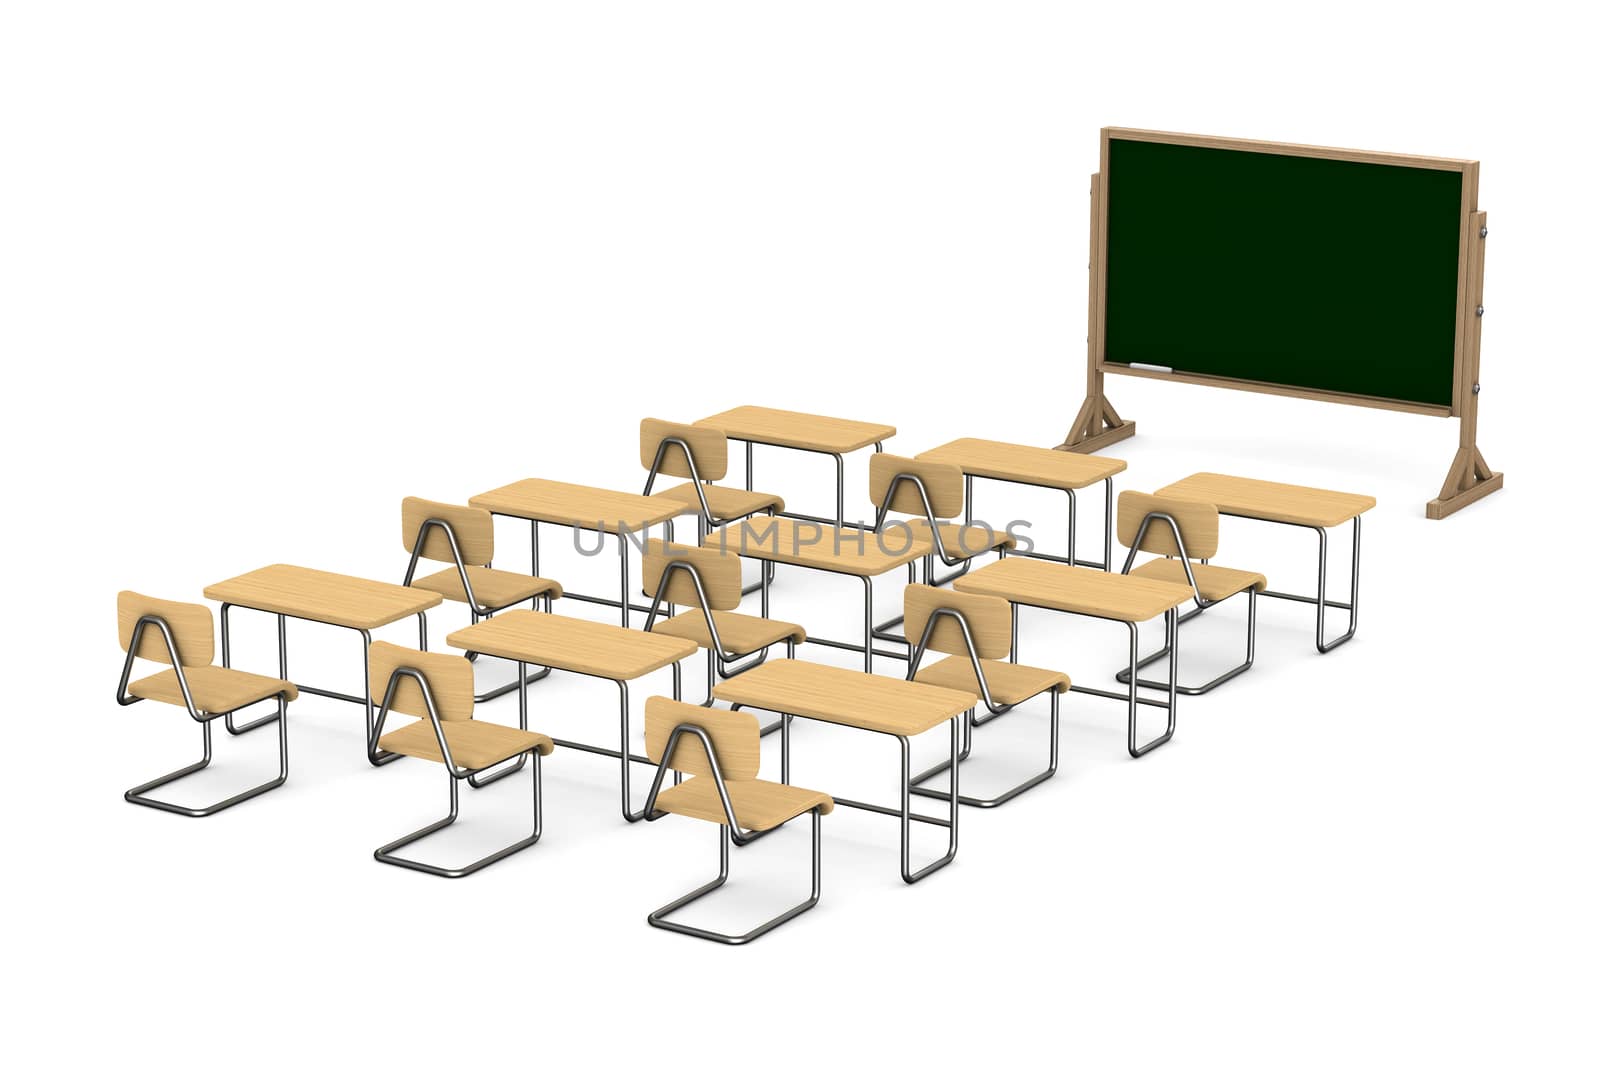 Classroom on white background. Isolated 3D image